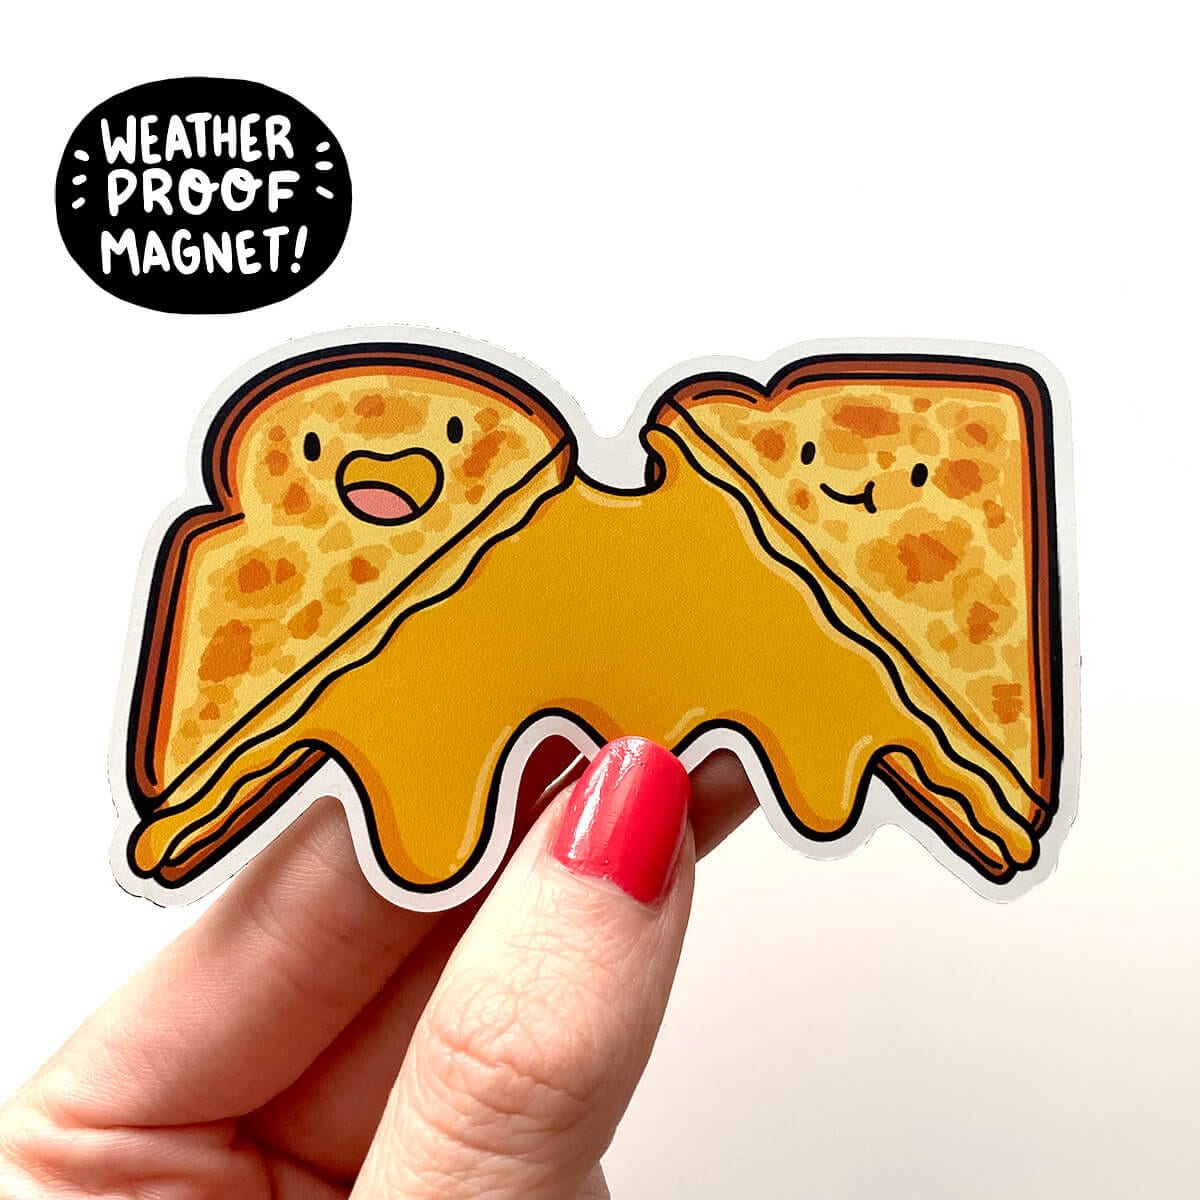 Grilled Cheese Magnet